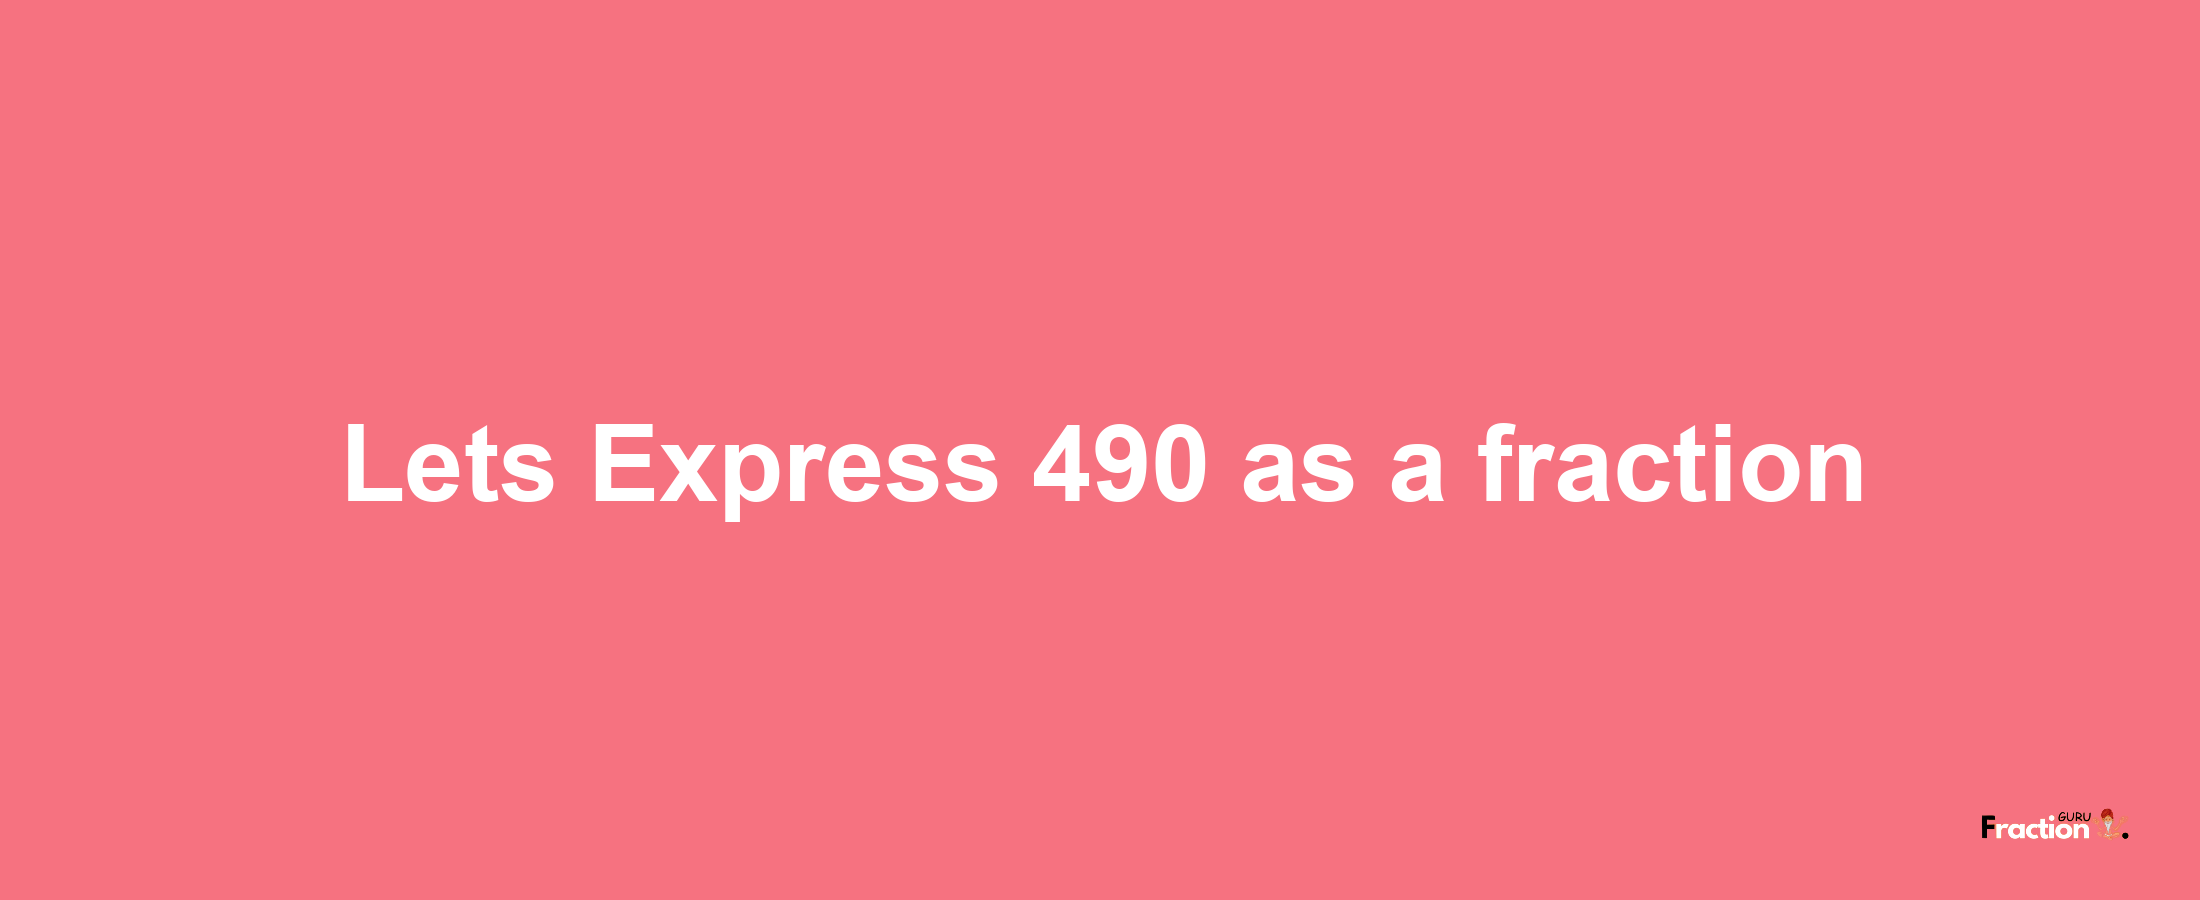 Lets Express 490 as afraction